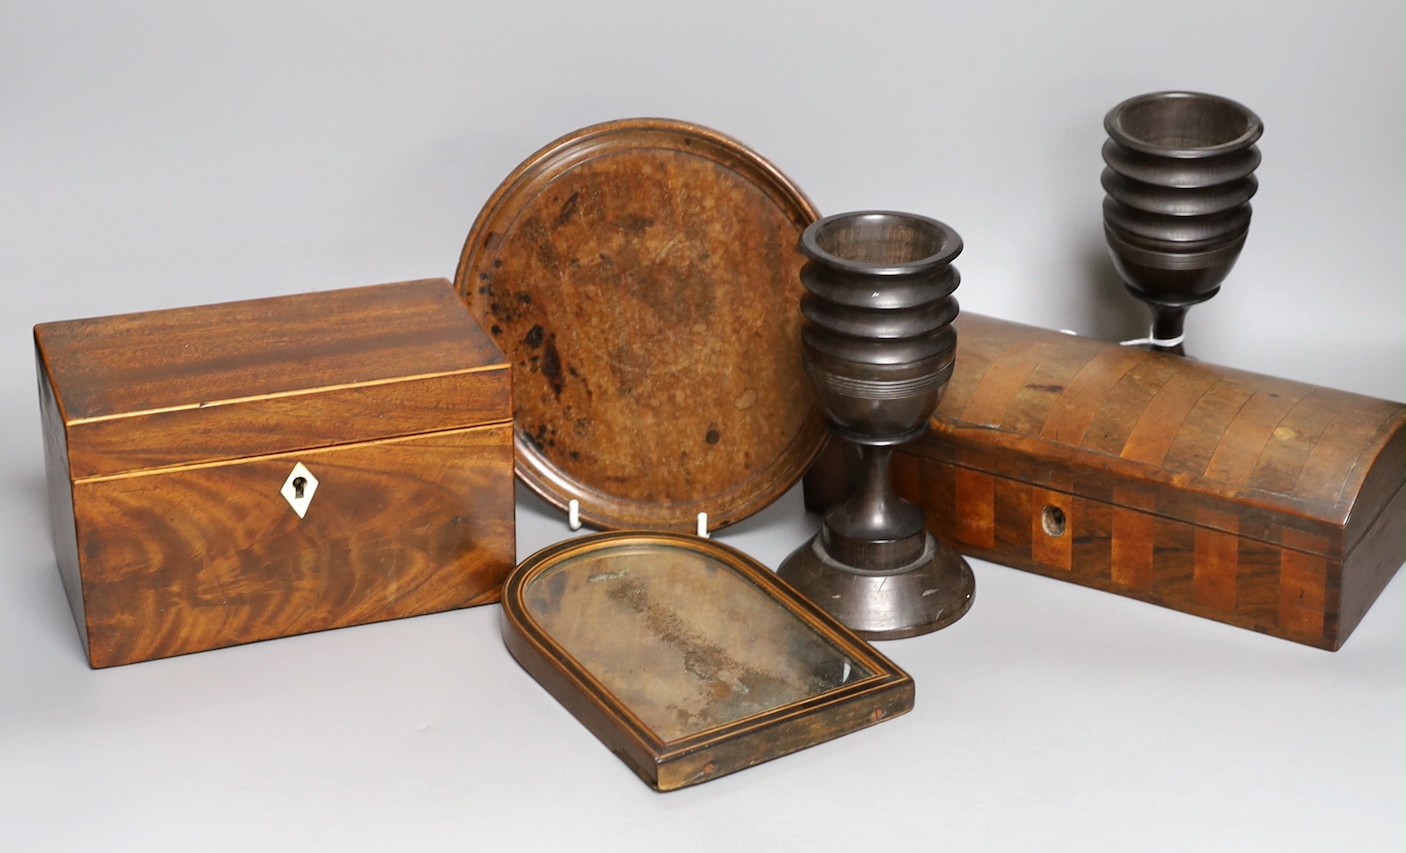 A George III inlaid mahogany tea caddy, a Victorian satinwood and rosewood domed topped glove box, a burr wood circular tray, a George III inlaid mahogany domed topped easel mirror and a pair of turned hardwood cups     